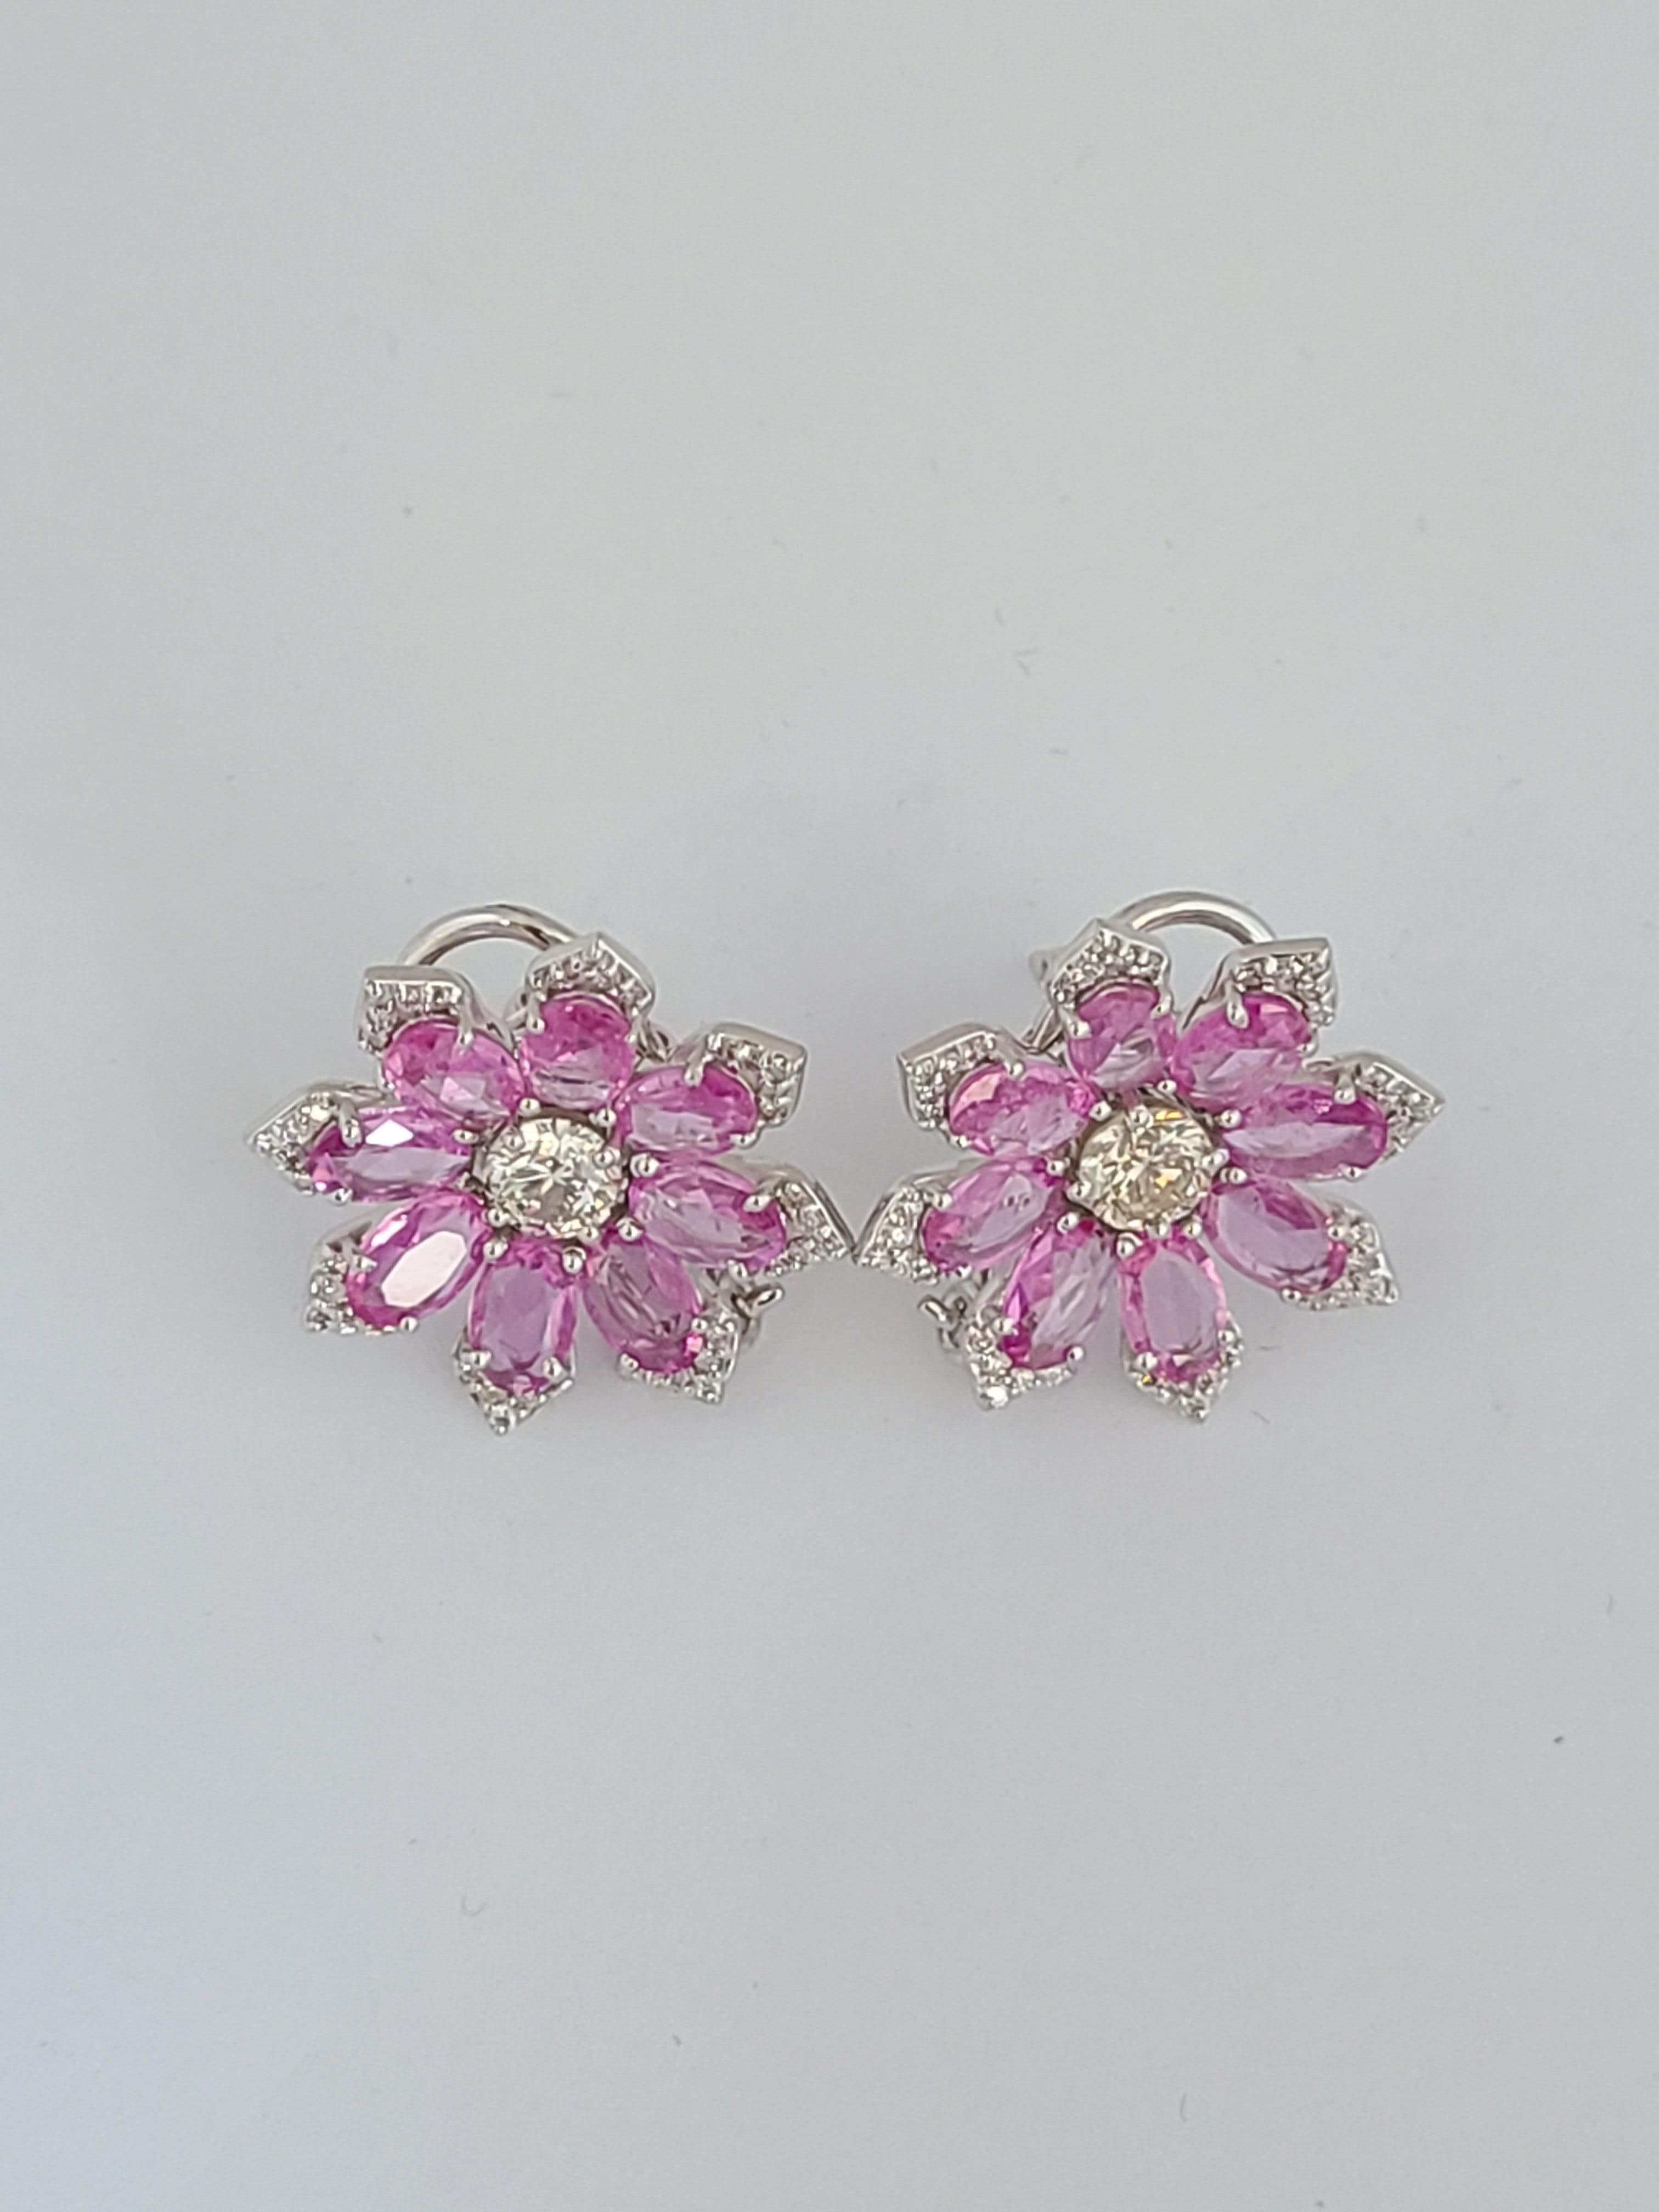 A pair of beautiful and chic studs set in 18k white gold with natural pink sapphires and diamonds. The pink sapphire weight is 5.98 carats and diamond weight is 1.43 carats. The studs dimensions in cm 2 x 2 x .3 (LXWXD).